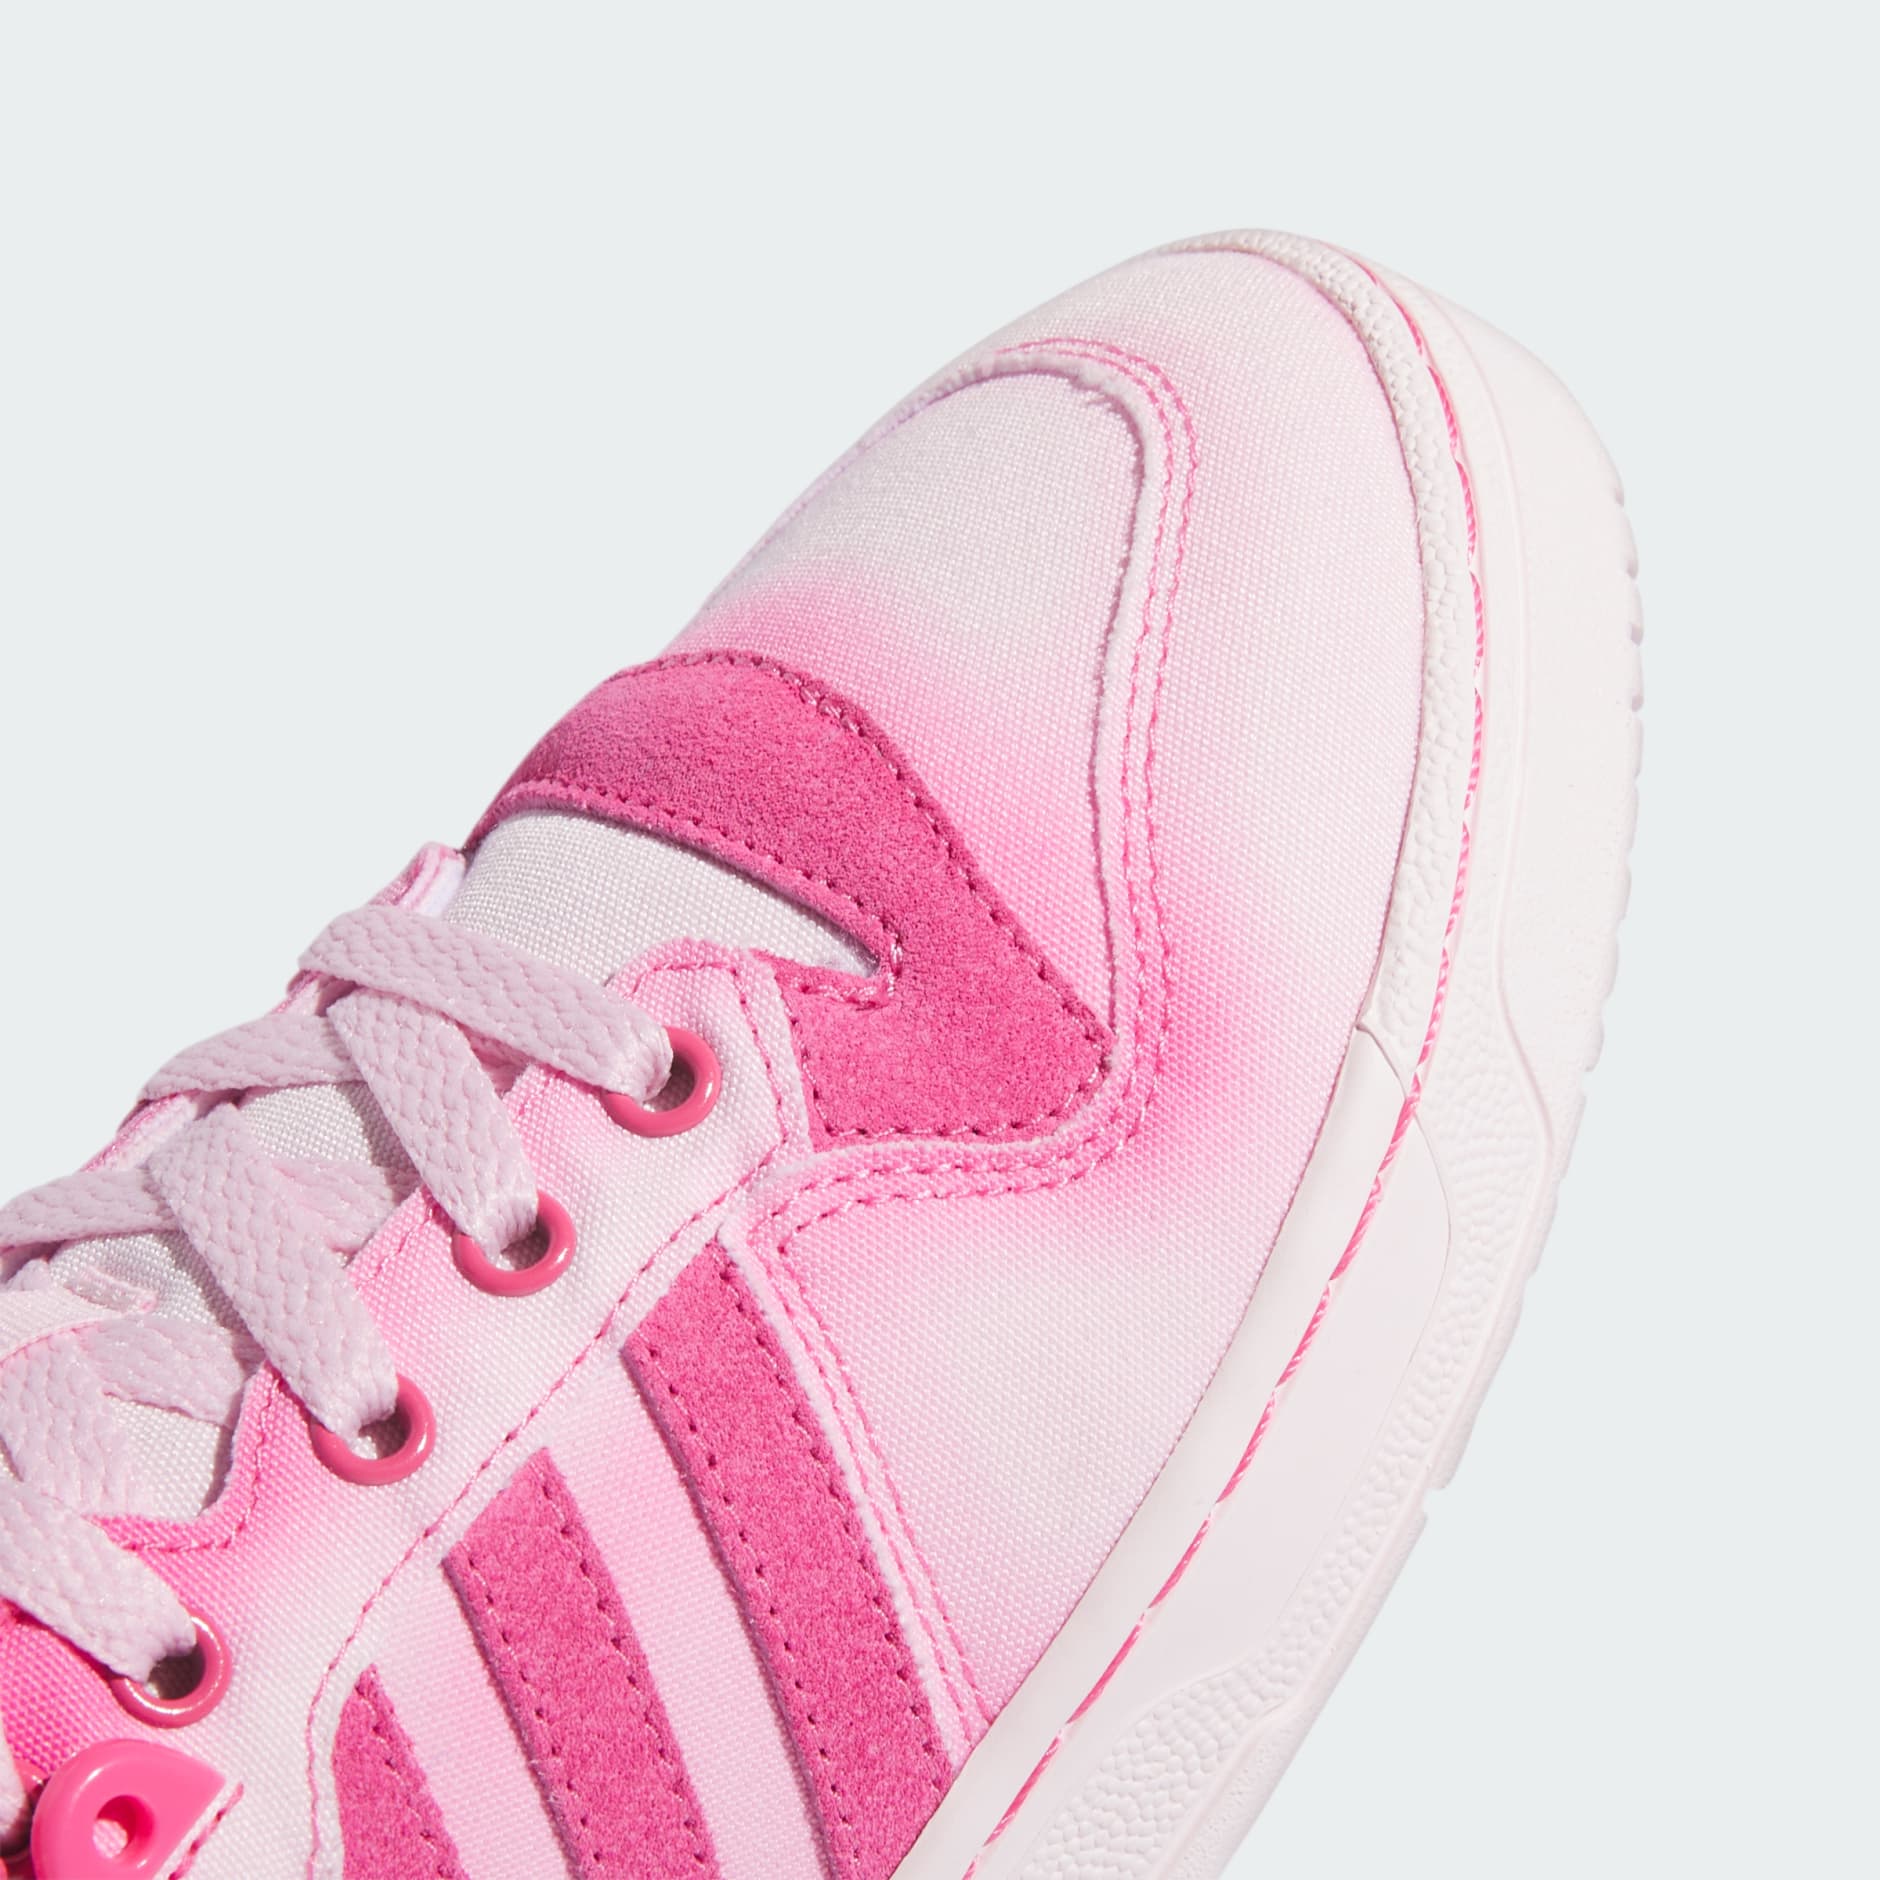 adidas Rivalry Low Shoes - Pink | adidas LK